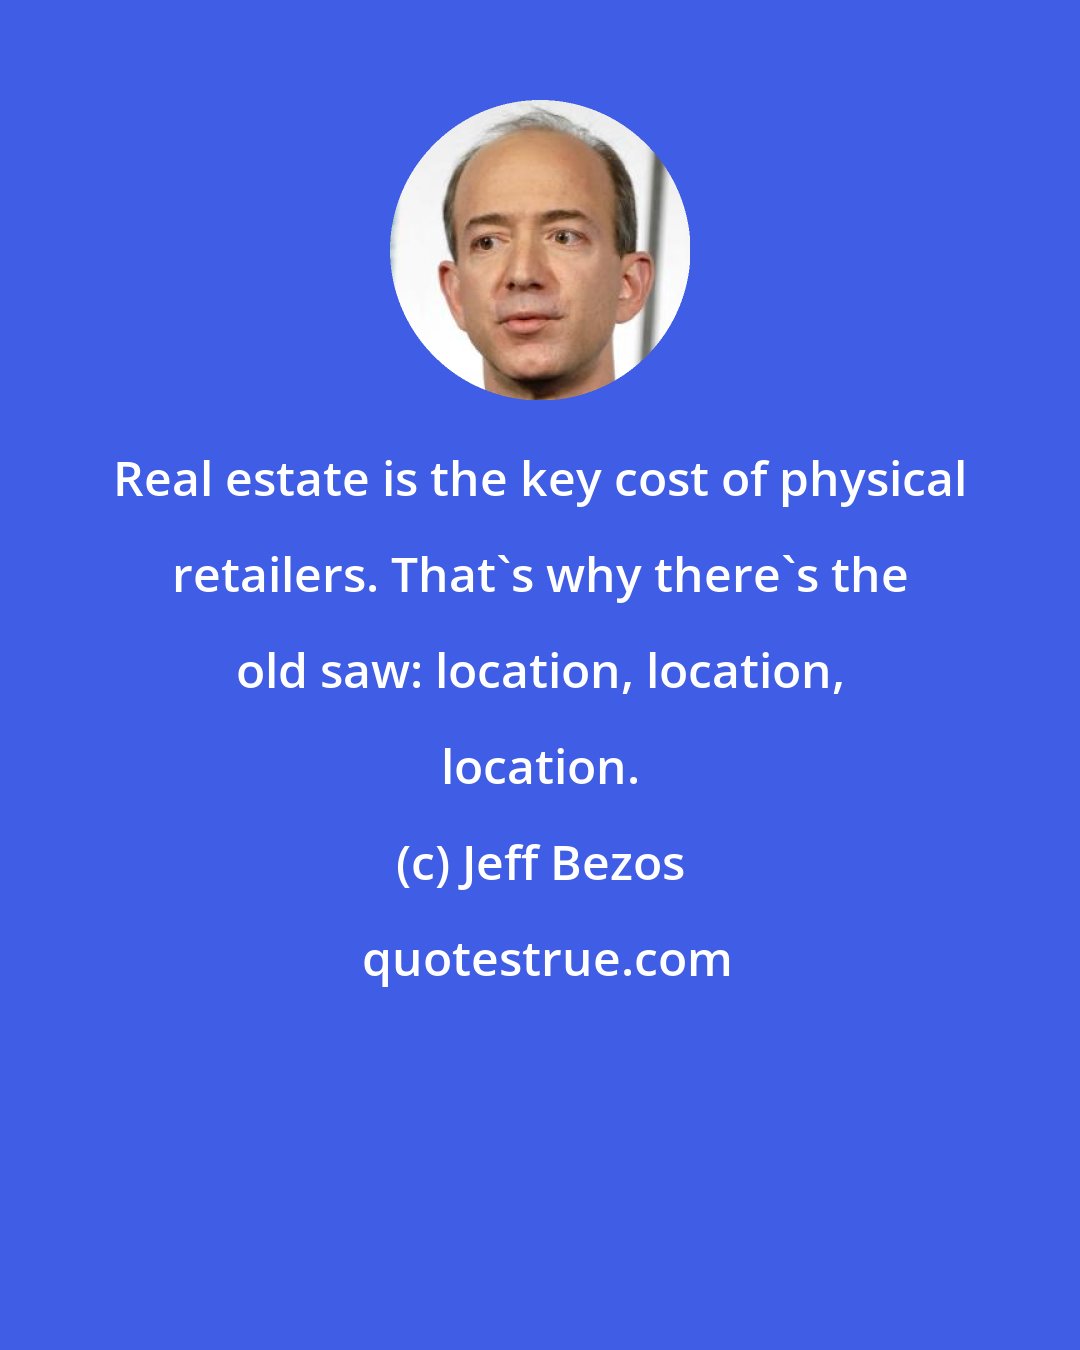 Jeff Bezos: Real estate is the key cost of physical retailers. That's why there's the old saw: location, location, location.